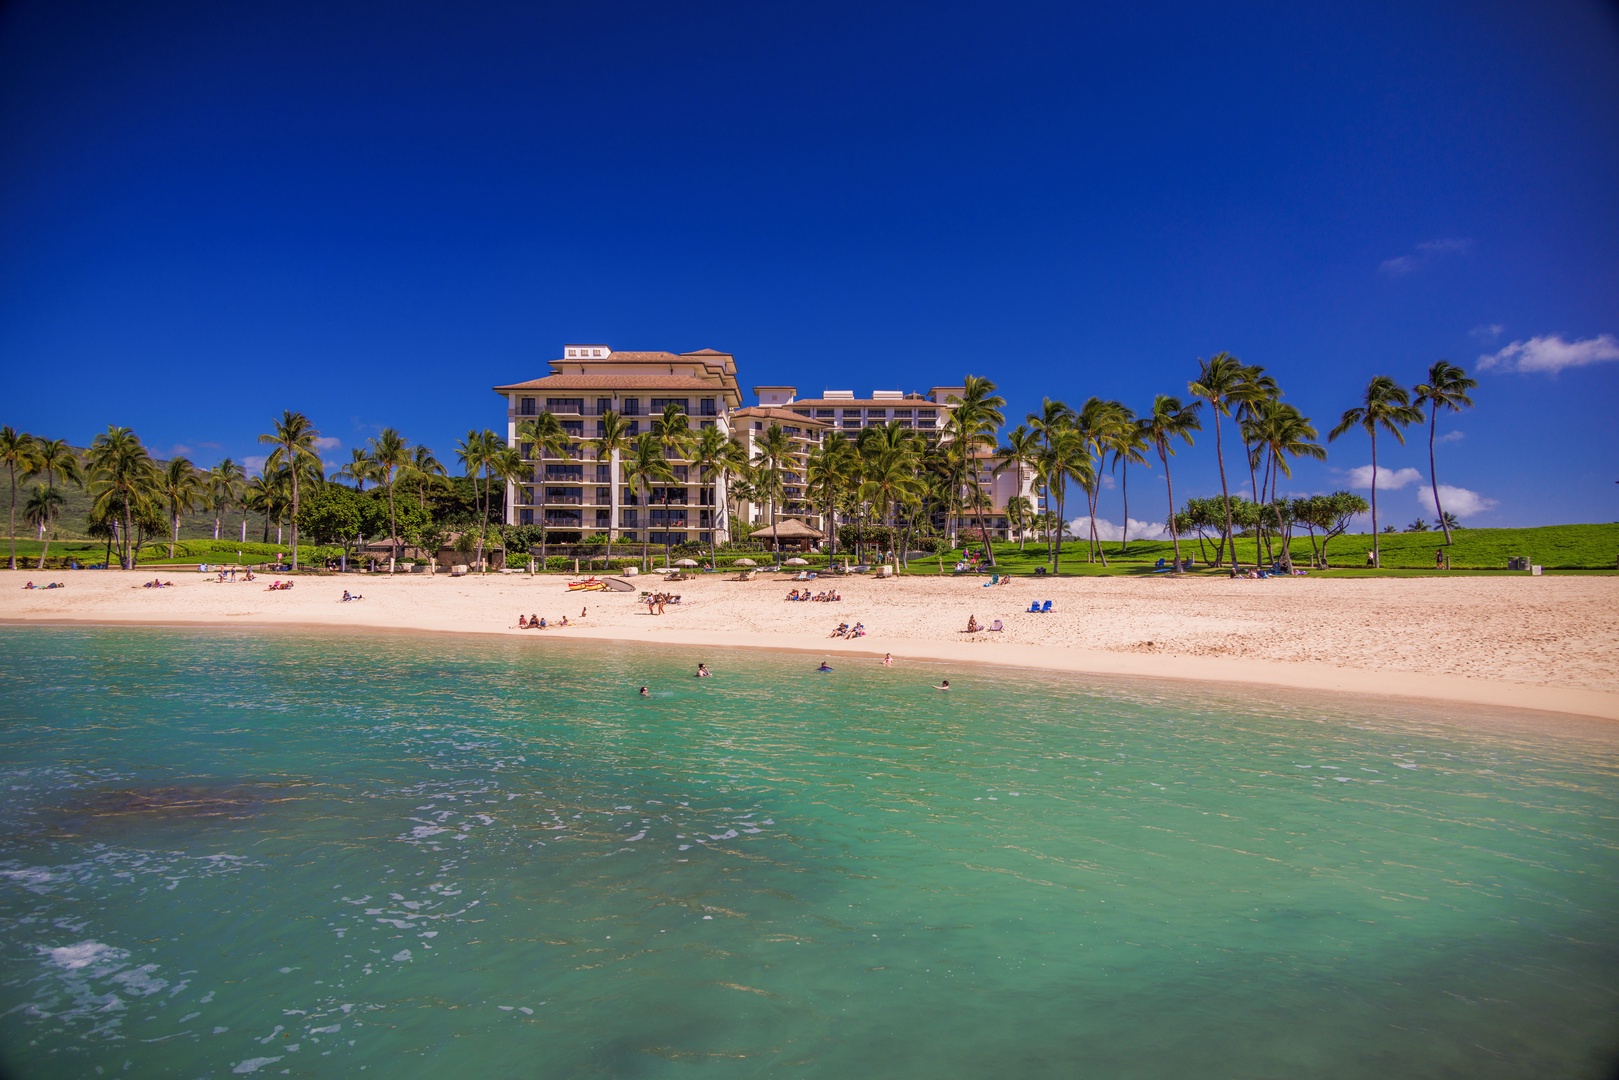 Kapolei Vacation Rentals, Ko Olina Kai 1097C - Ko Olina's private lagoons with soft sands and crystal blue water, perfect for afternoon swim or spectacular views.